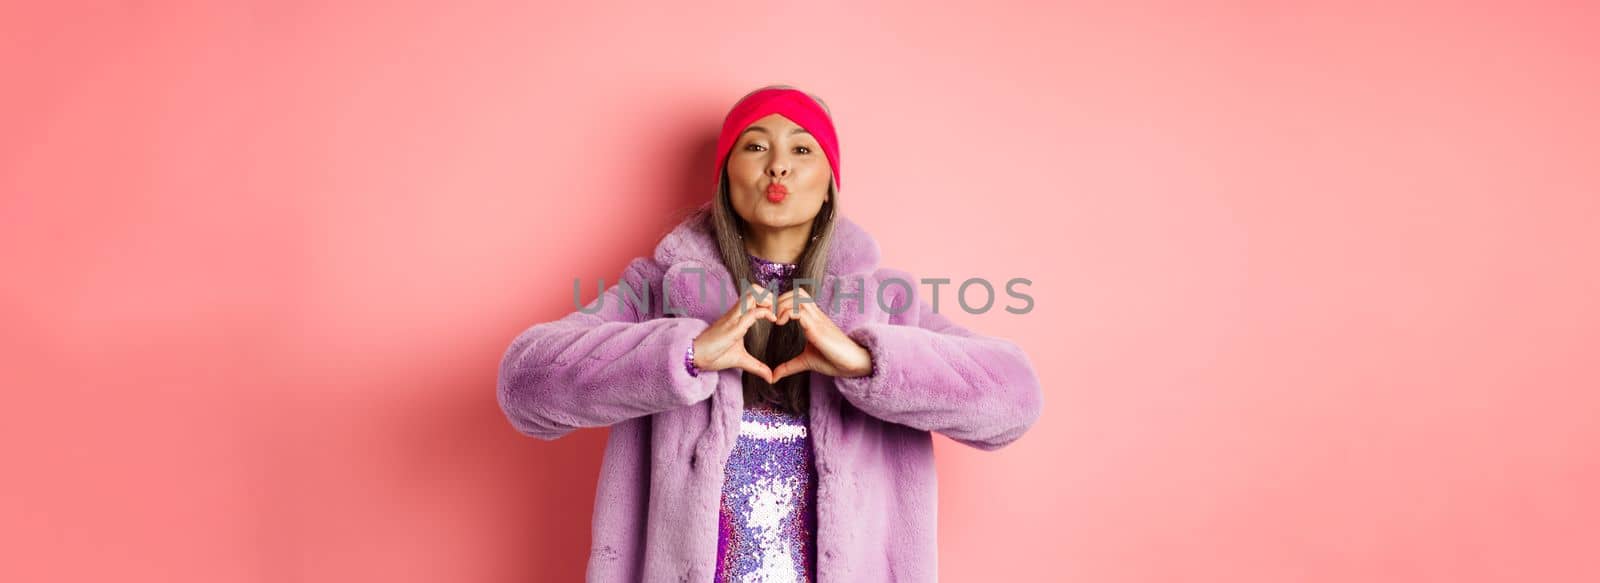 Romance and valentines day. Happy asian senior woman showing heart sign, I love you gesture, pucker lips for kiss, standing over pink background.